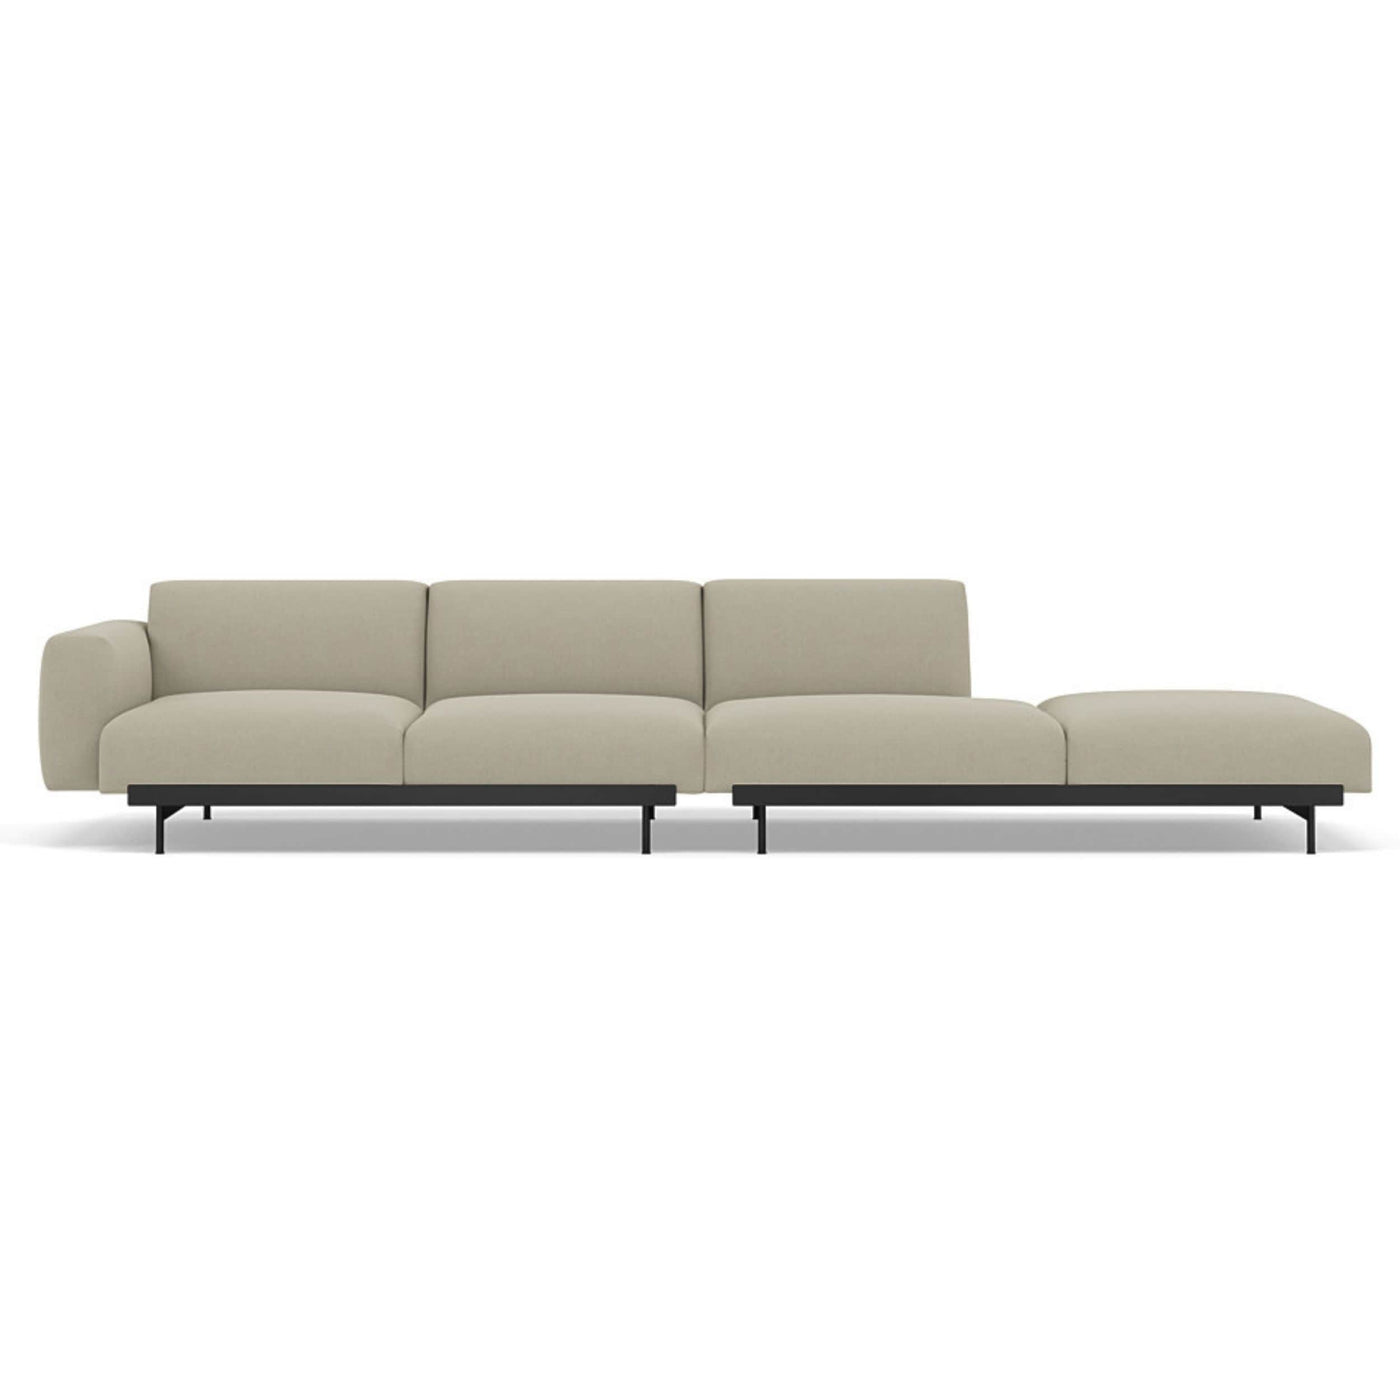 Muuto In Situ Modular 4 Seater Sofa configuration 2. Made to order from someday designs. #colour_fiord-322